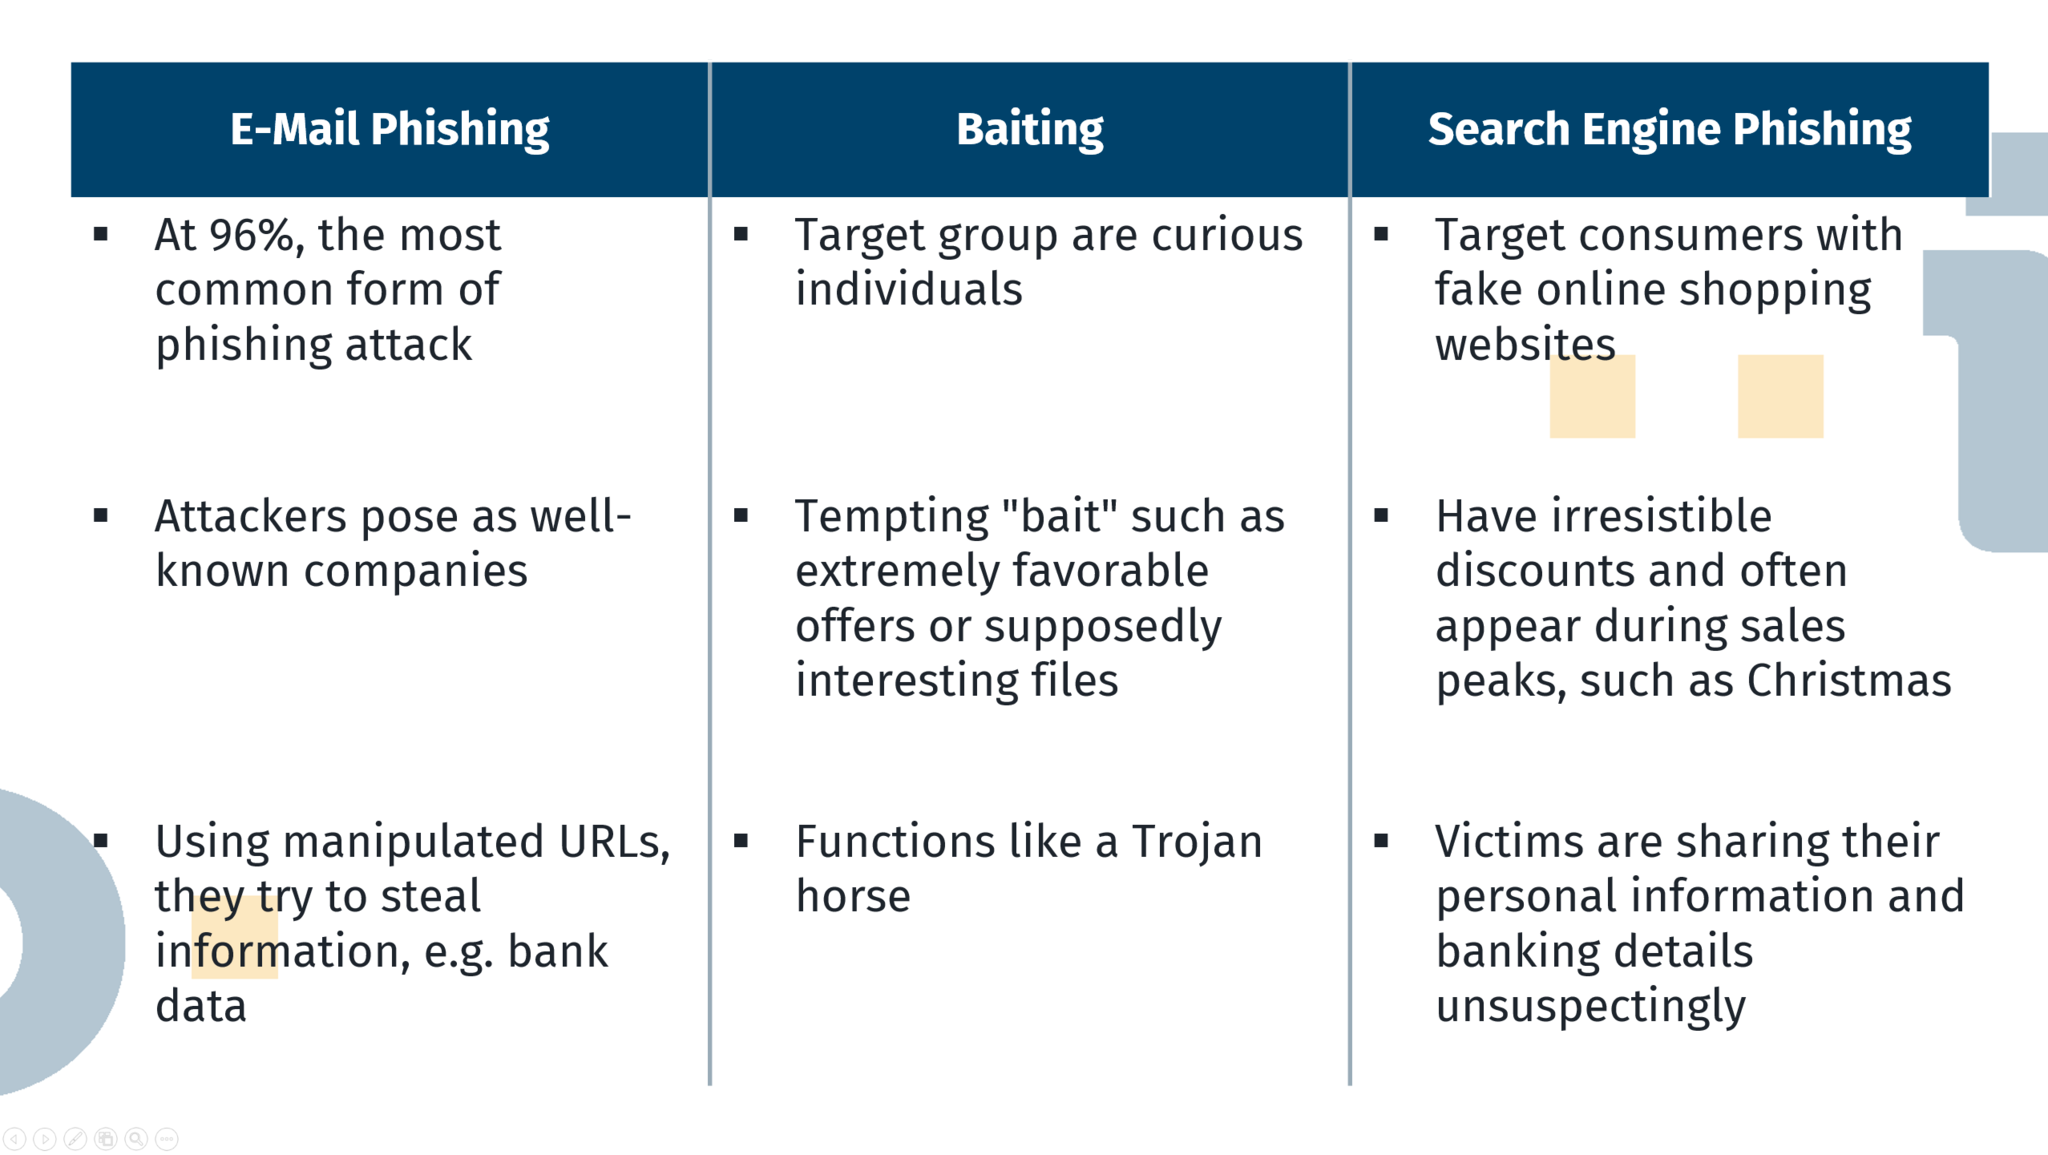 A three-parted overview on E-Mail Phishing, Baiting and Search Engine Phishing. E-Mail Phishing: With 96% the most common form of phishing attacks. Here attackers pose as well-known companies. Usually manipulated URLs are used in an attempt to steal information, such as bank details. Baiting: The target group of this form of phishing are curious individuals. They are being baited with offers or interesting file names. This form of phishing functions like a Trojan horse. Search Engine Phishing: In this form of phishing customers are targeted with fake online shopping websites. These have irresistible discounts and mostly appear during the appropriate season, such as Christmas.